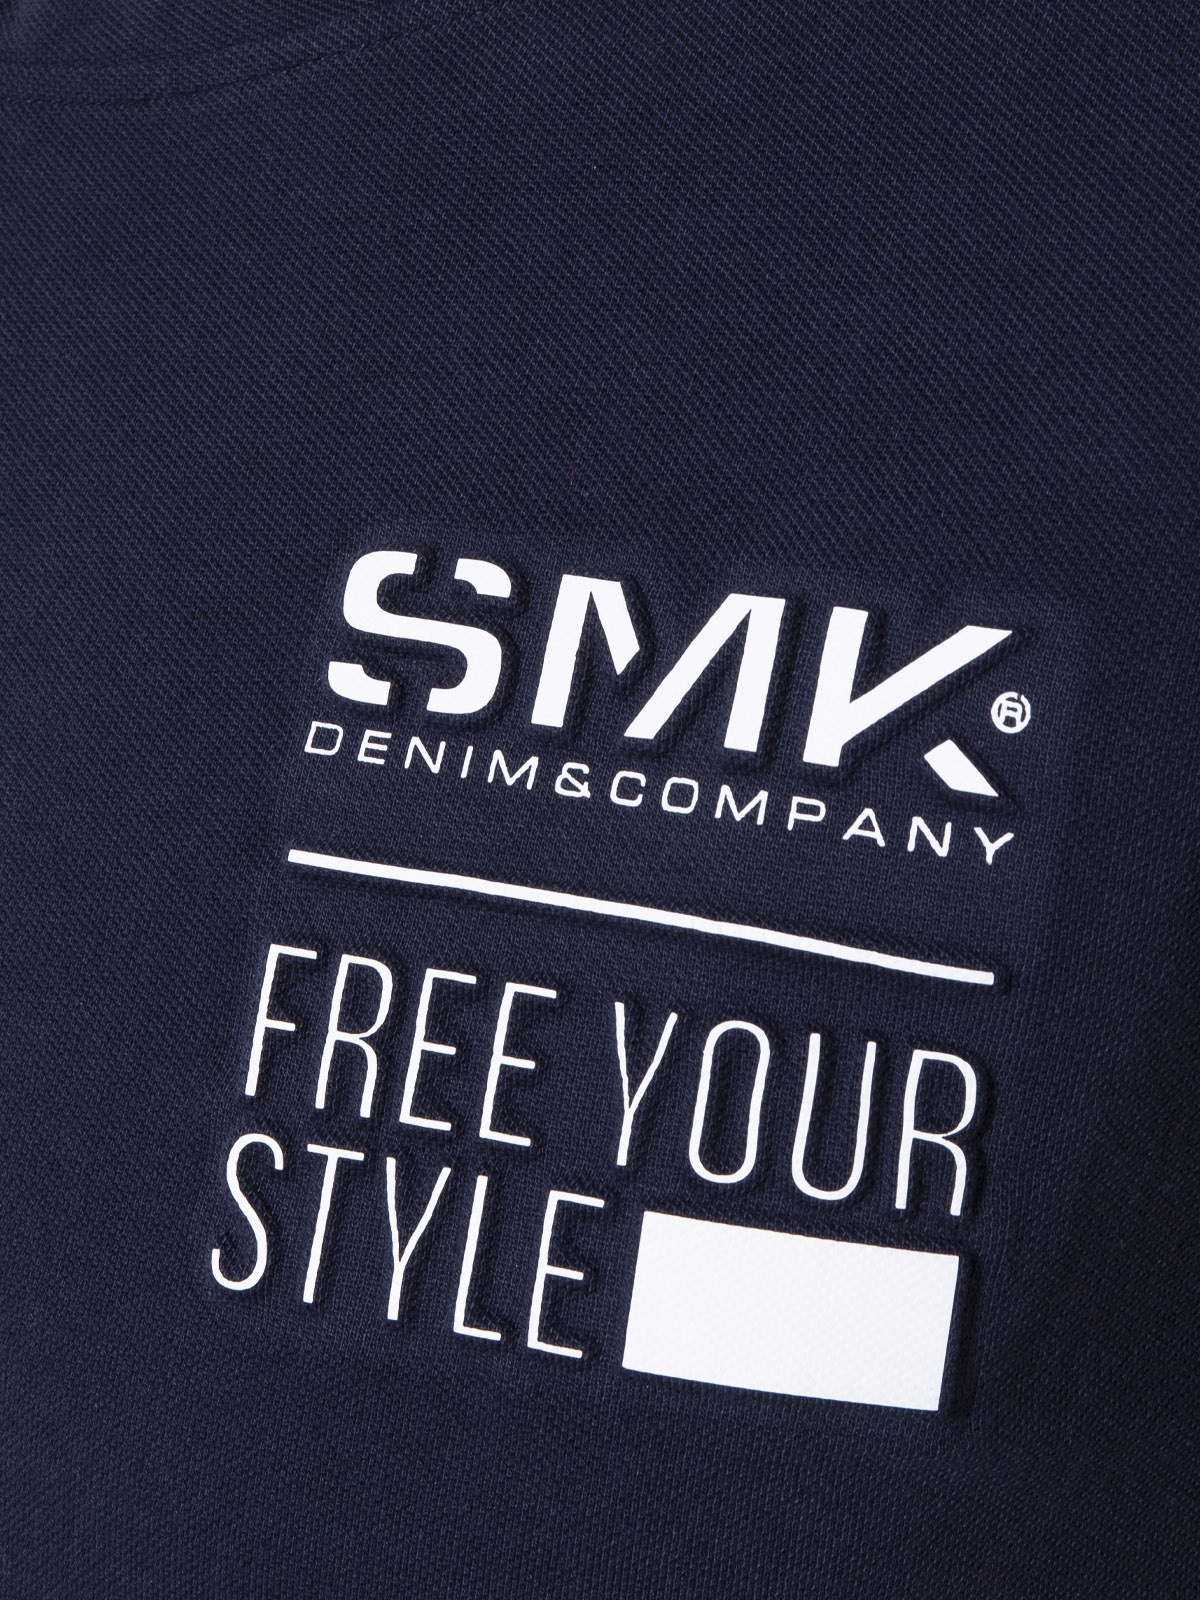 T-SHIRT SMK FREEYOURSTYLE